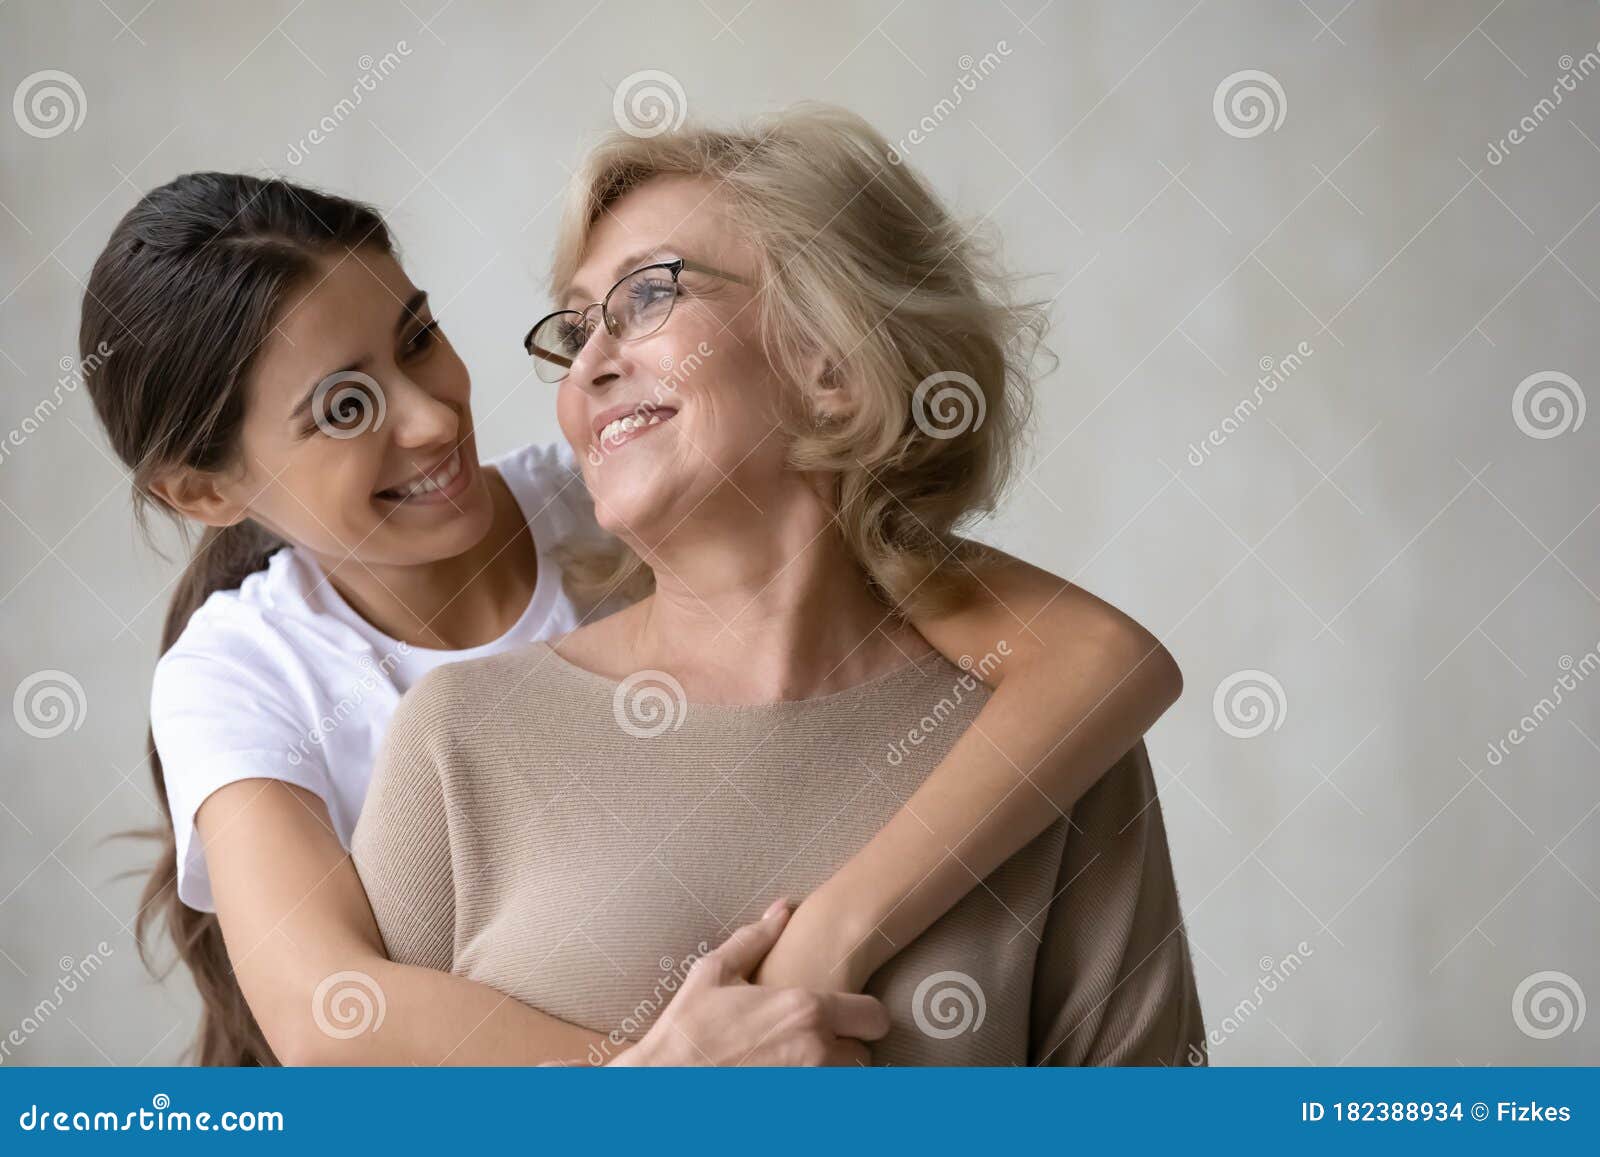 Adult Daughter Hugs from Behind Happy Mature Mother